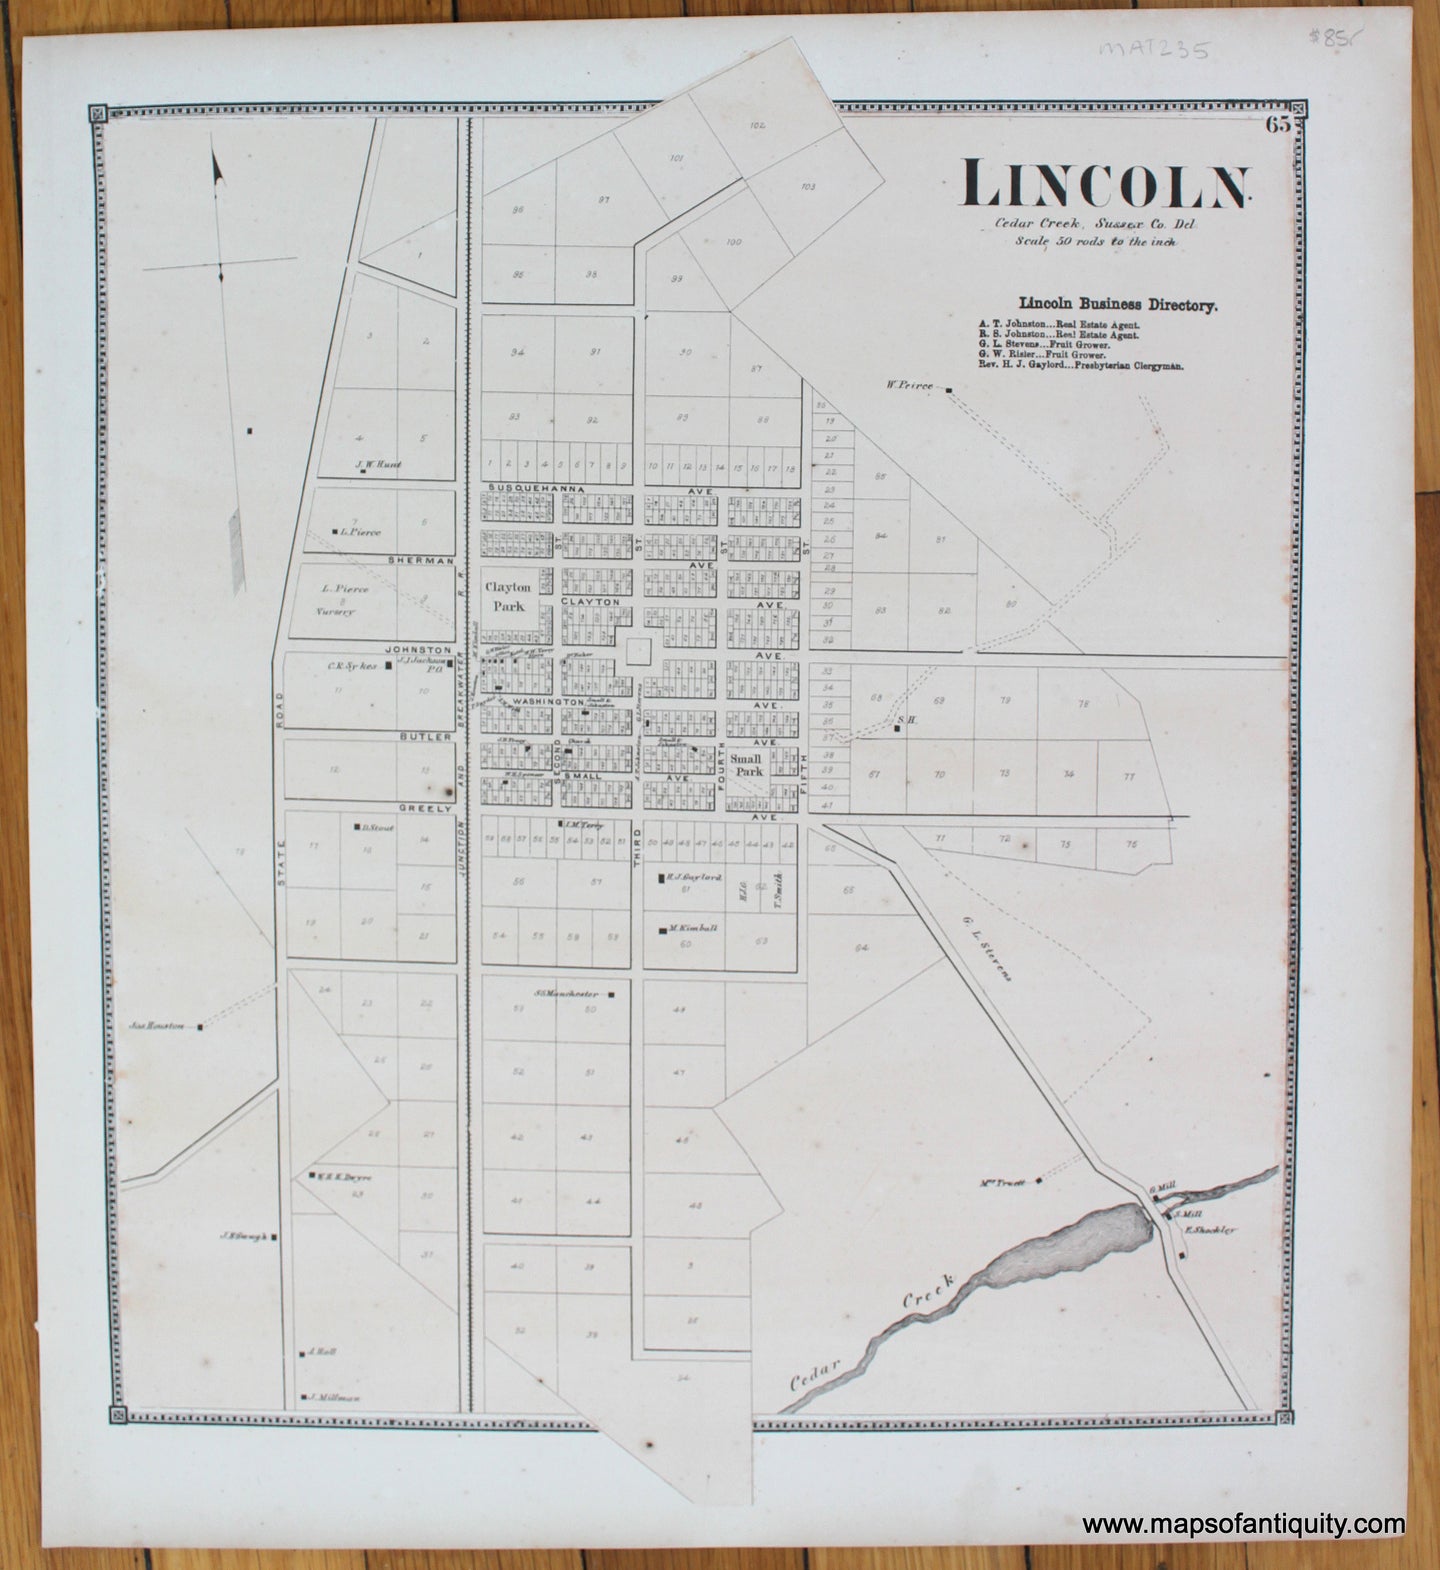 Lincoln-Antique-Map-1868-Beers-1860s-1800s-19th-century-Maps-of-Antiquity